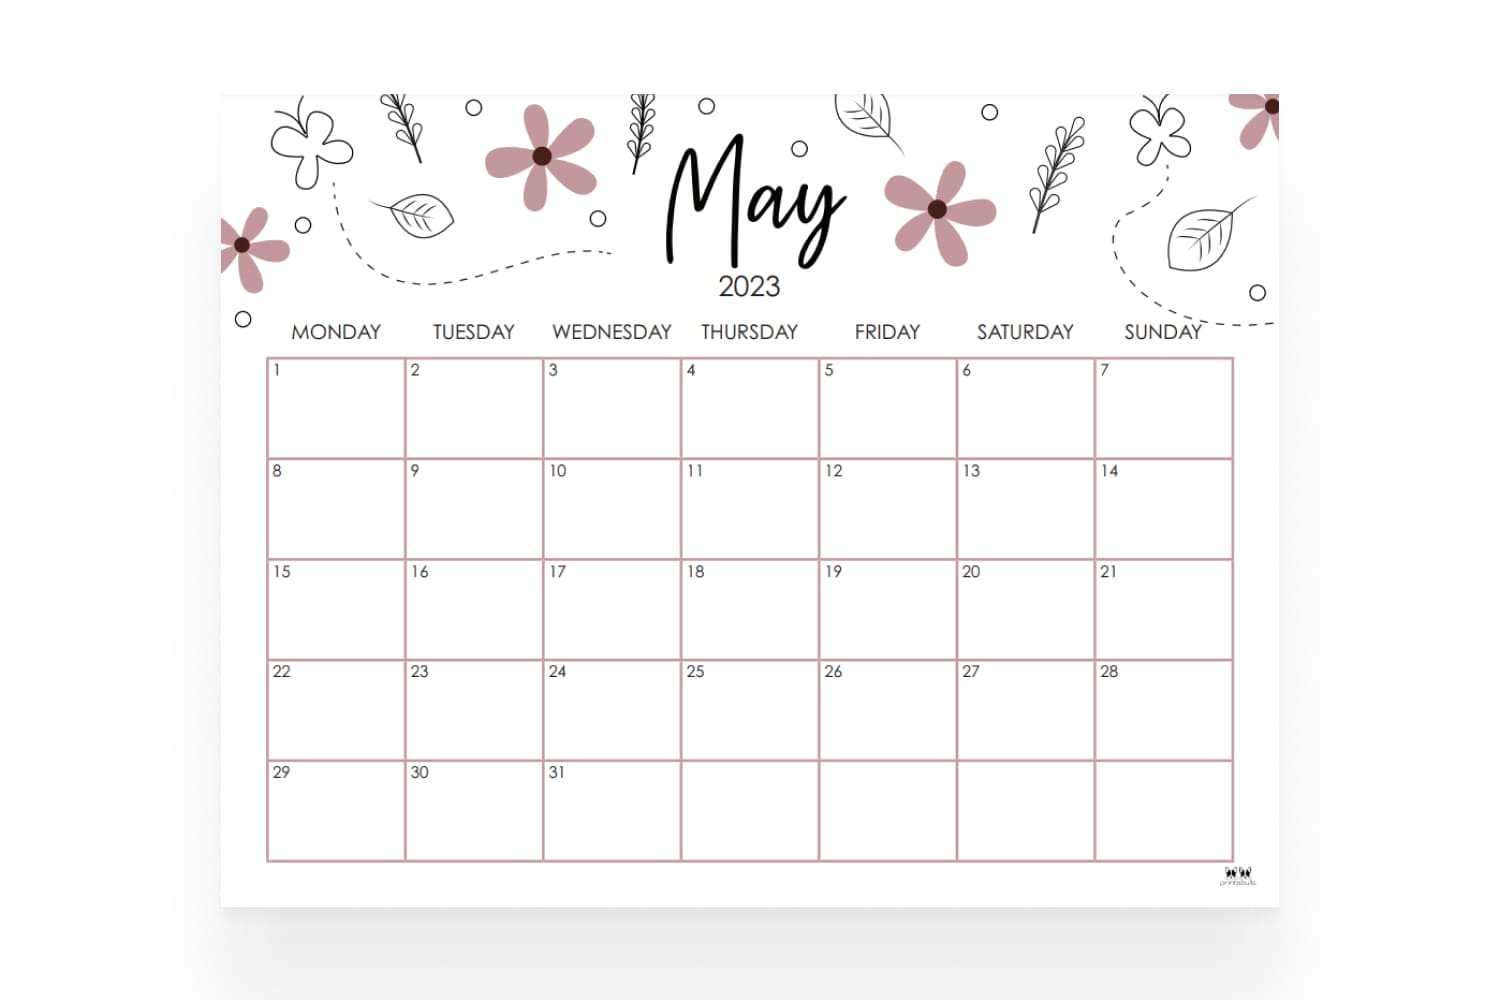 May calendar with a white background with flowers, black text, and large date boxes with space for notes.